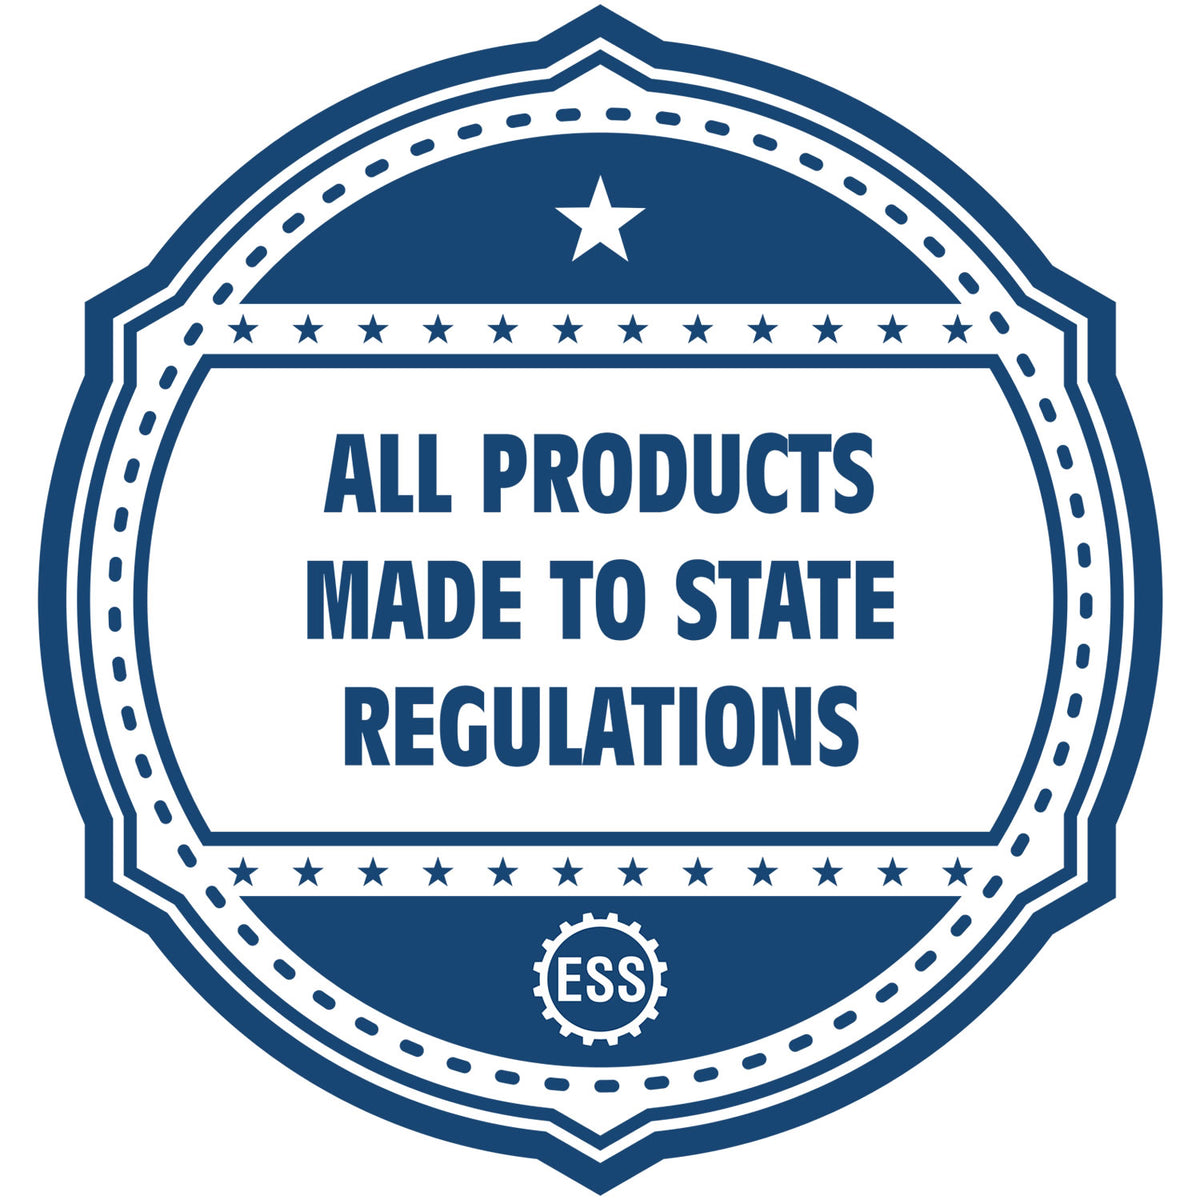 An icon or badge element for the Long Reach California PE Seal showing that this product is made in compliance with state regulations.